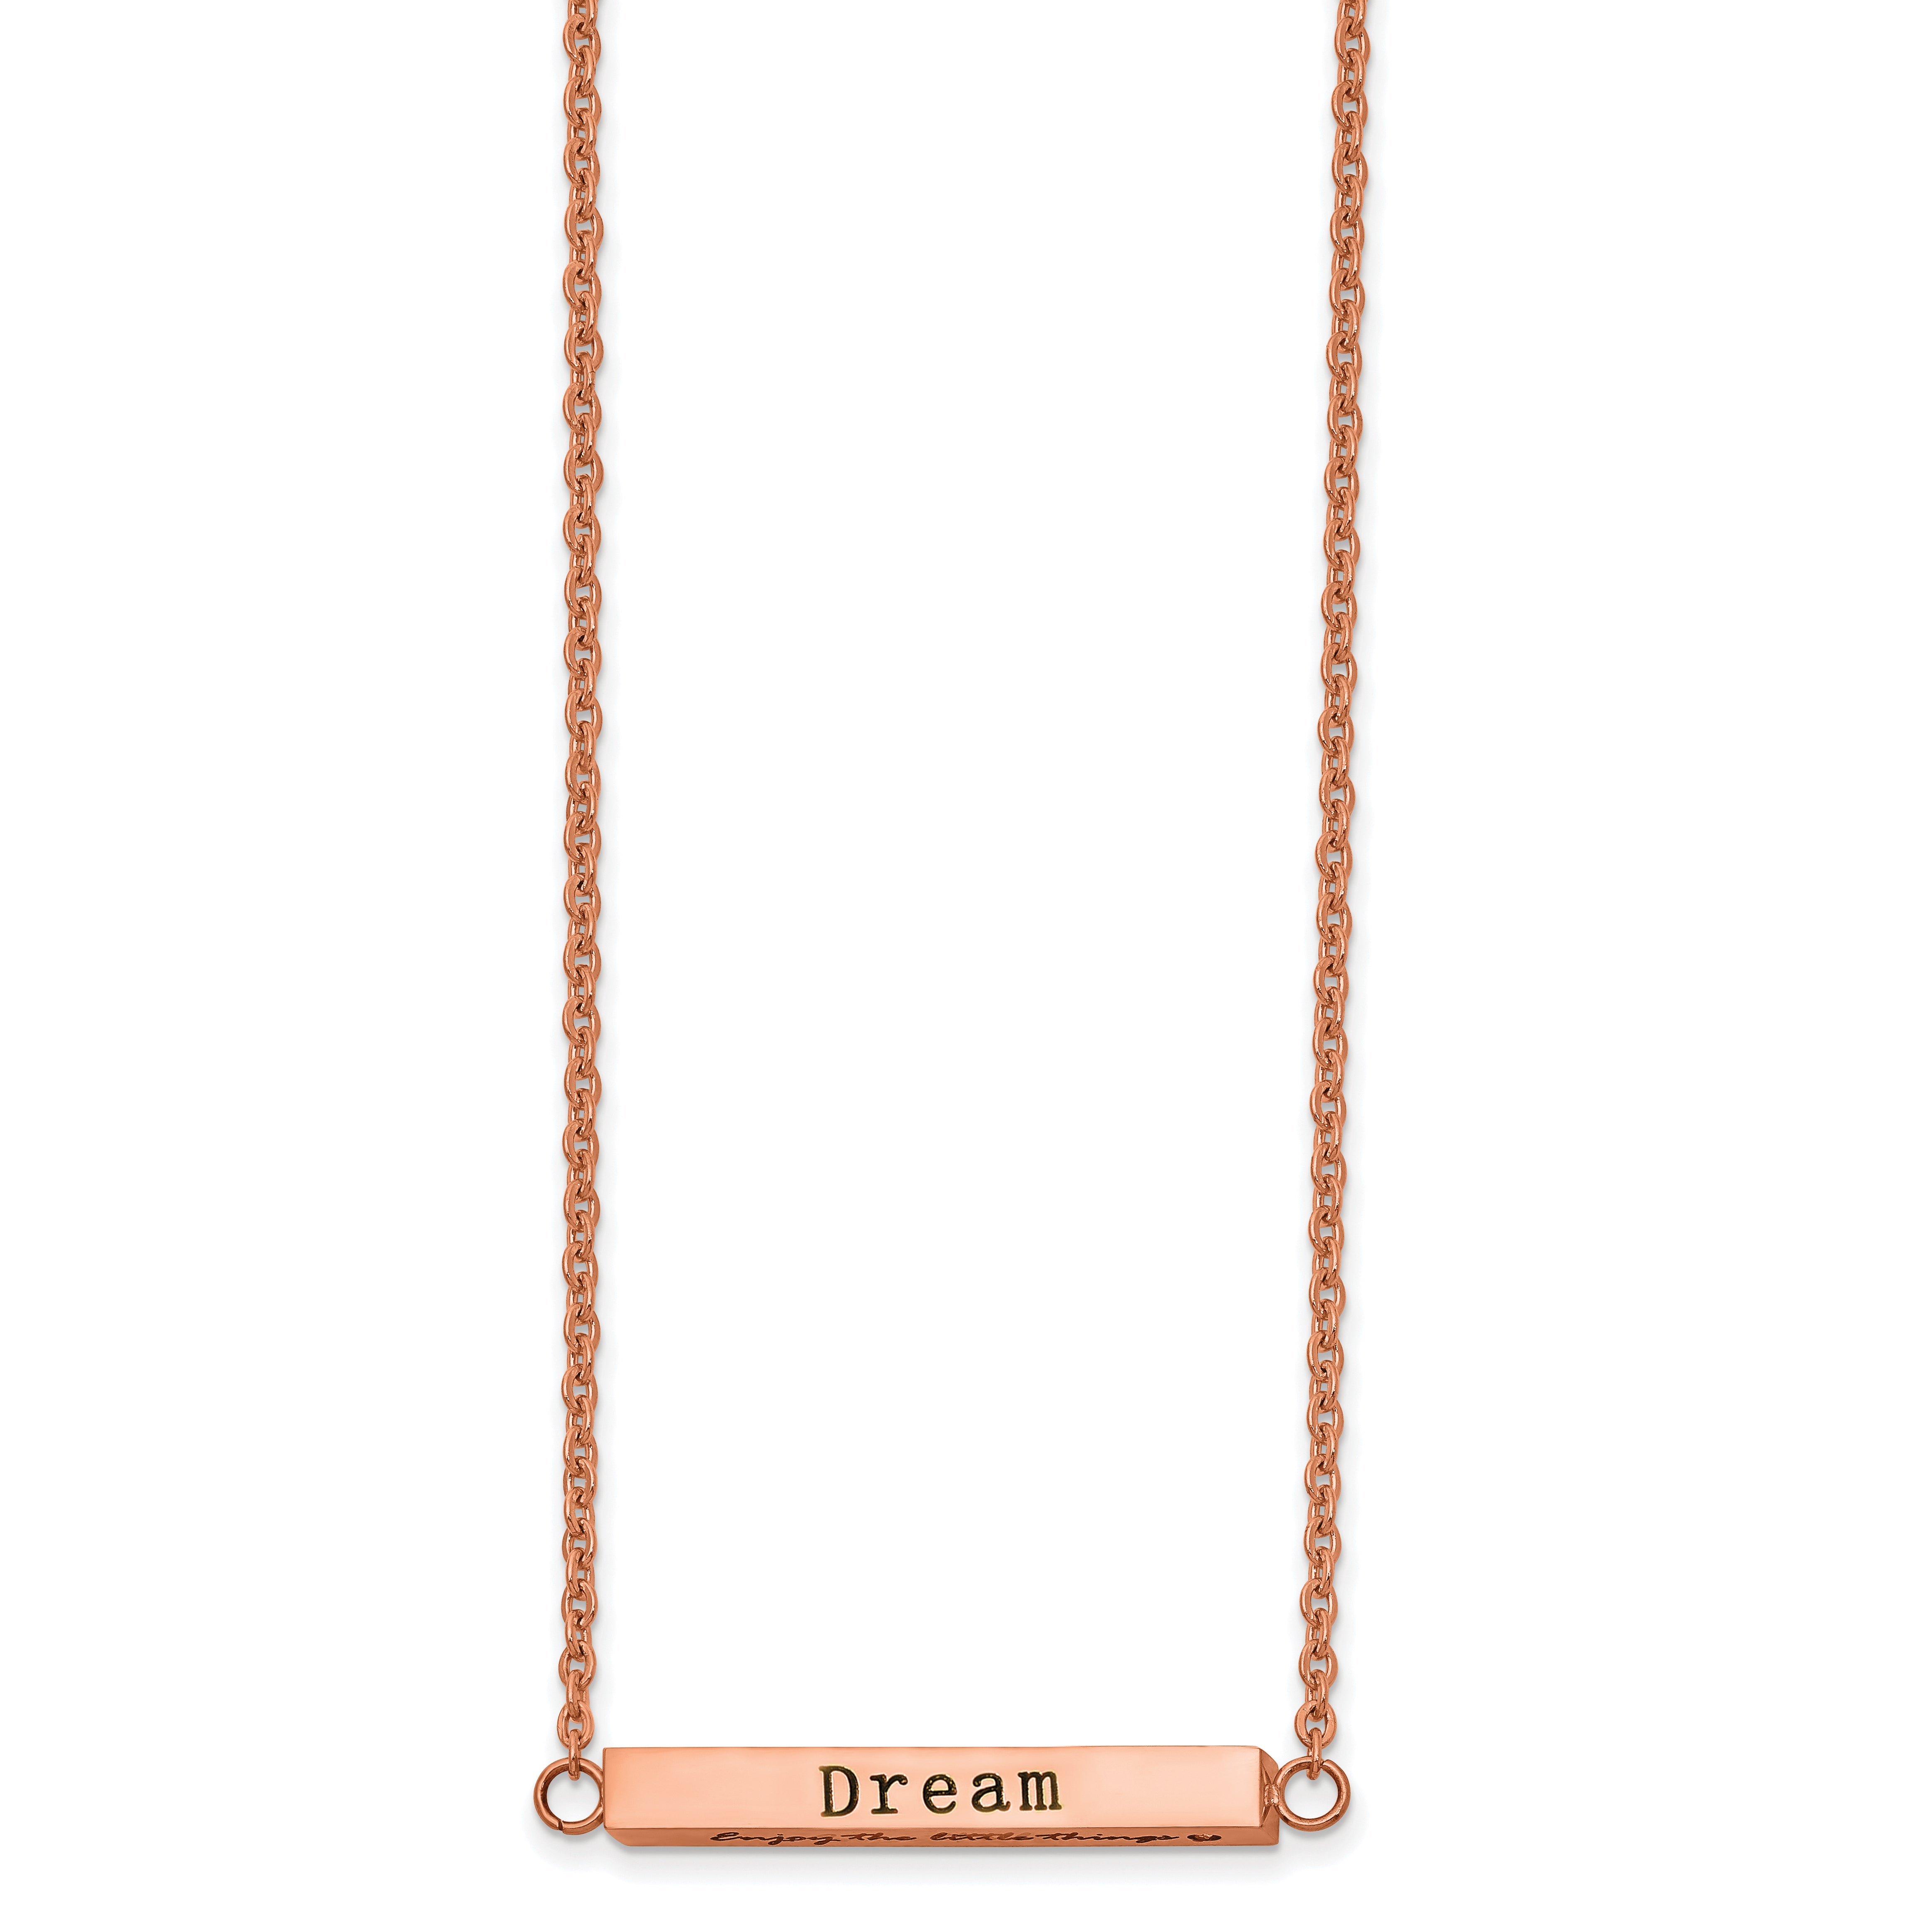 Chisel Stainless Steel Polished Rose IP-plated Enameled CZ ENJOY THE LITTLE THINGS Bar on a 16 inch Cable Chain with a 2 inch Extension Necklace